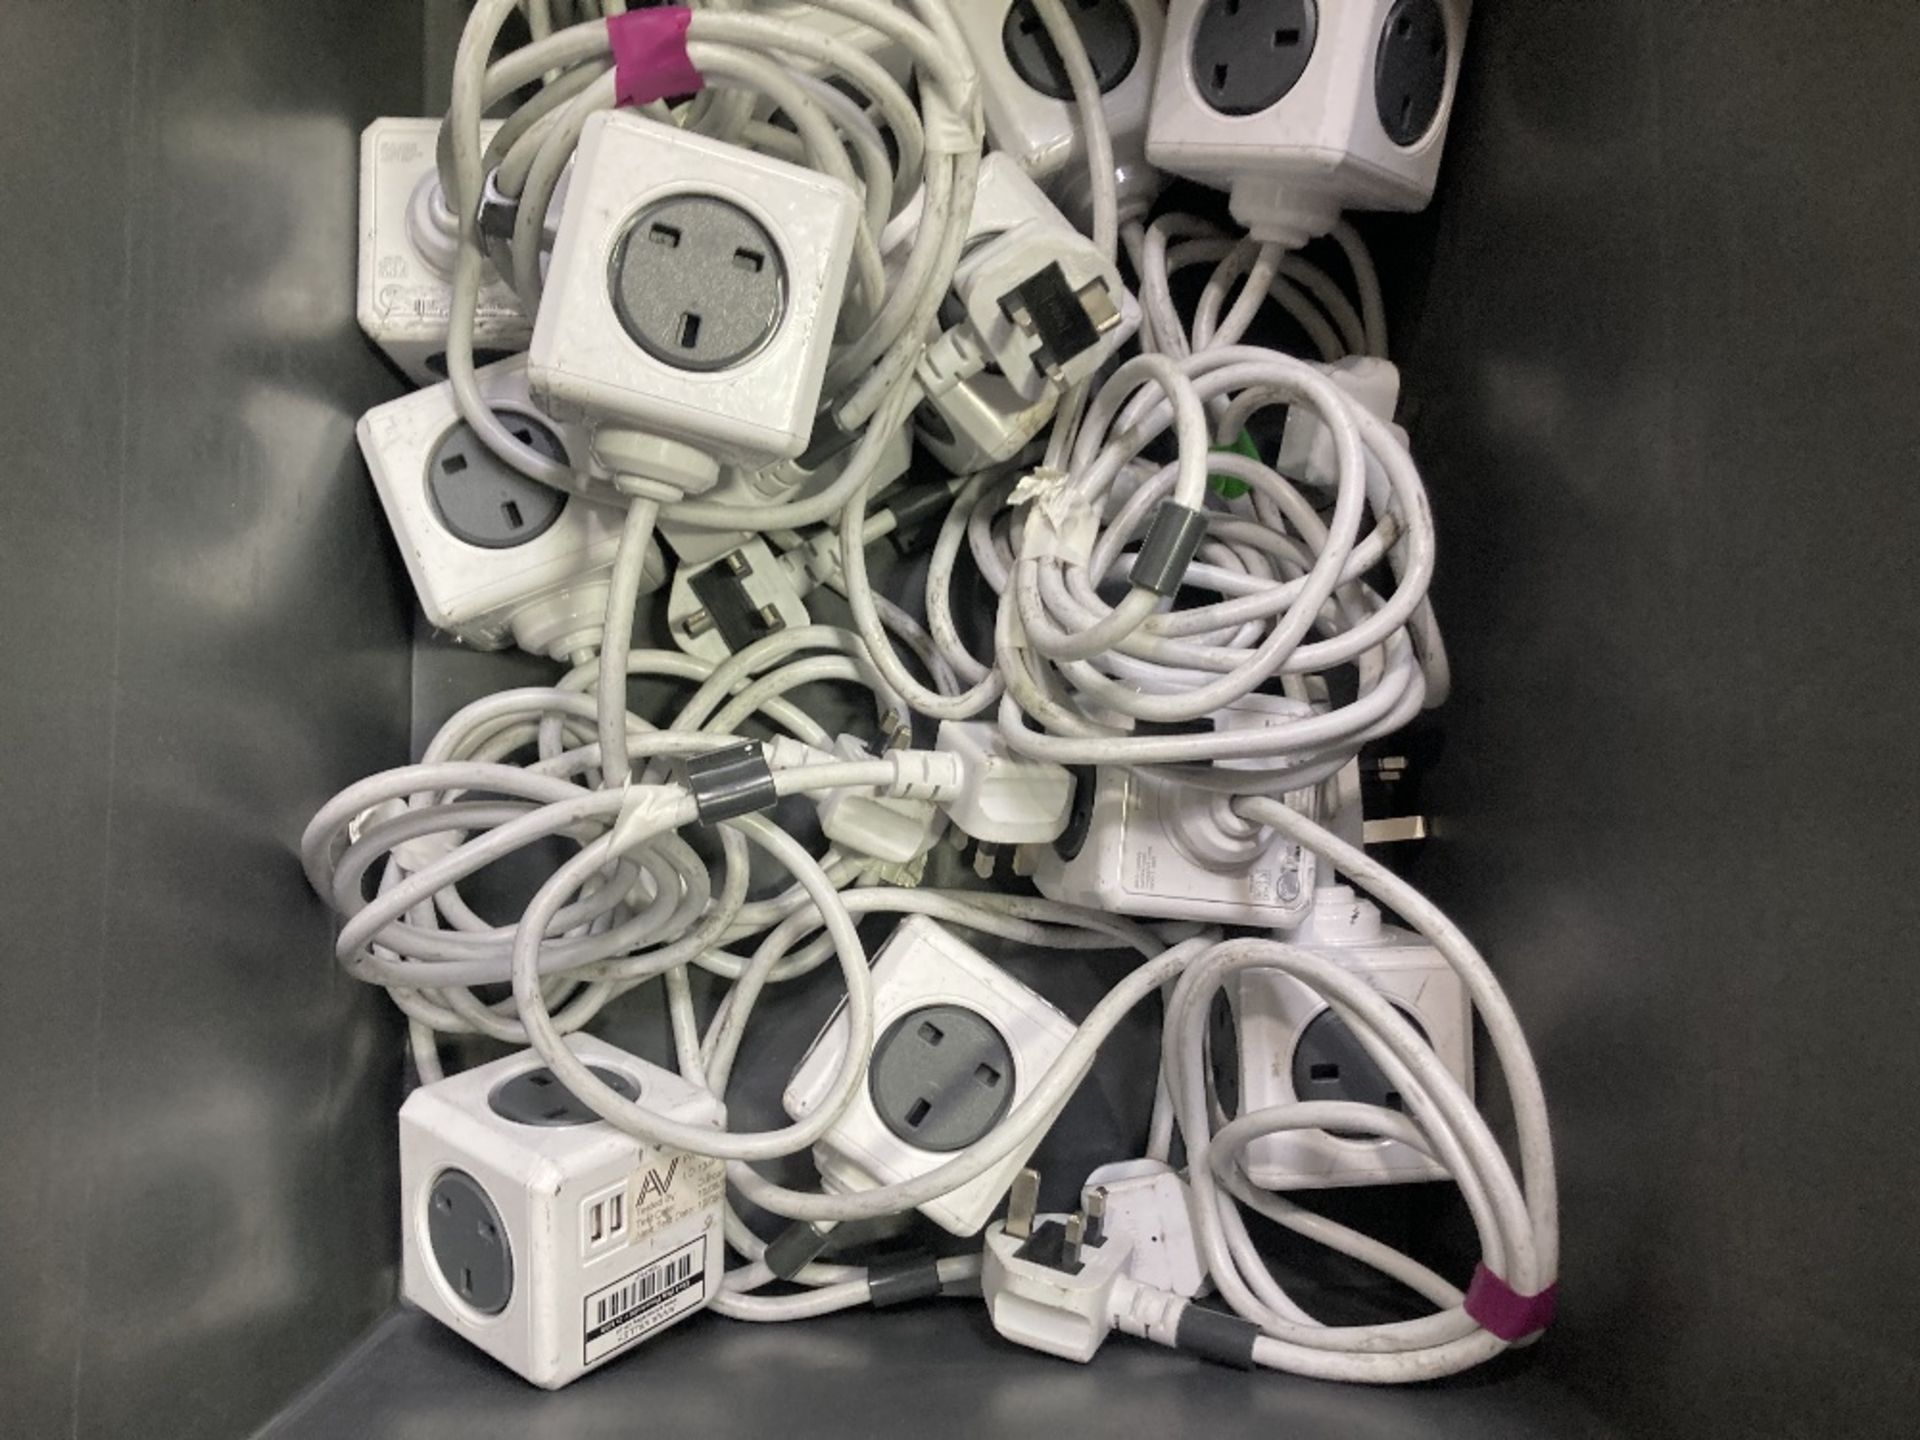 Large Quantity Of 13amp 4-Way Powercube + 2x USB Cable Adapters With Plastic Lin Bins - Image 4 of 8